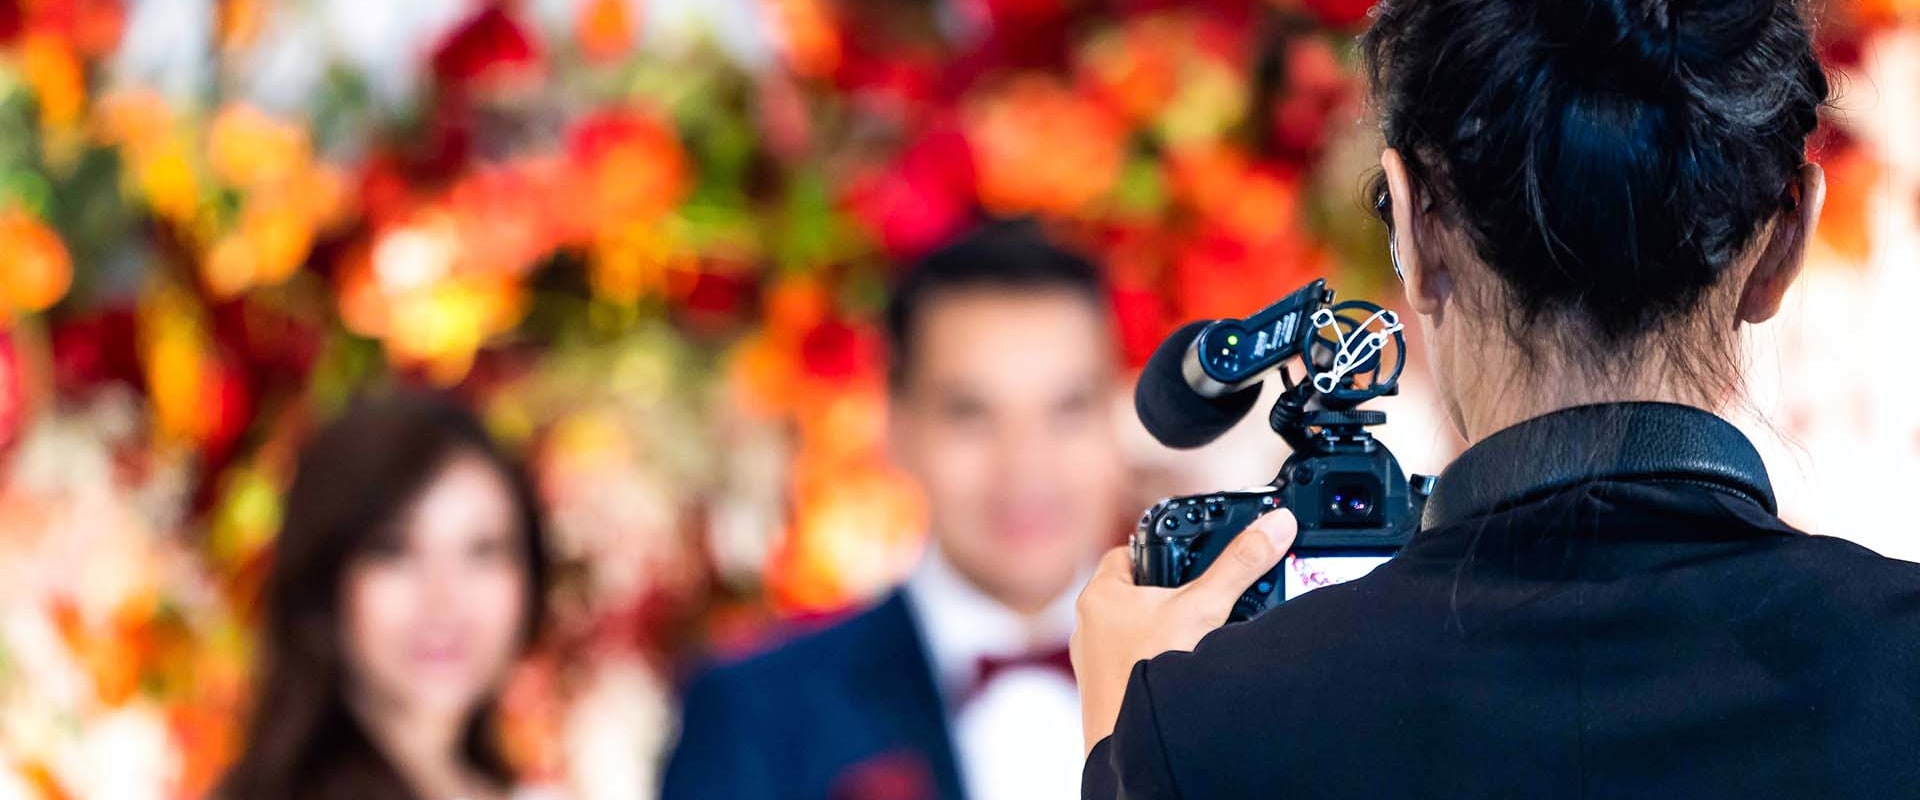 Do People Do Post-Wedding Photoshoots? A Guide for Newlyweds